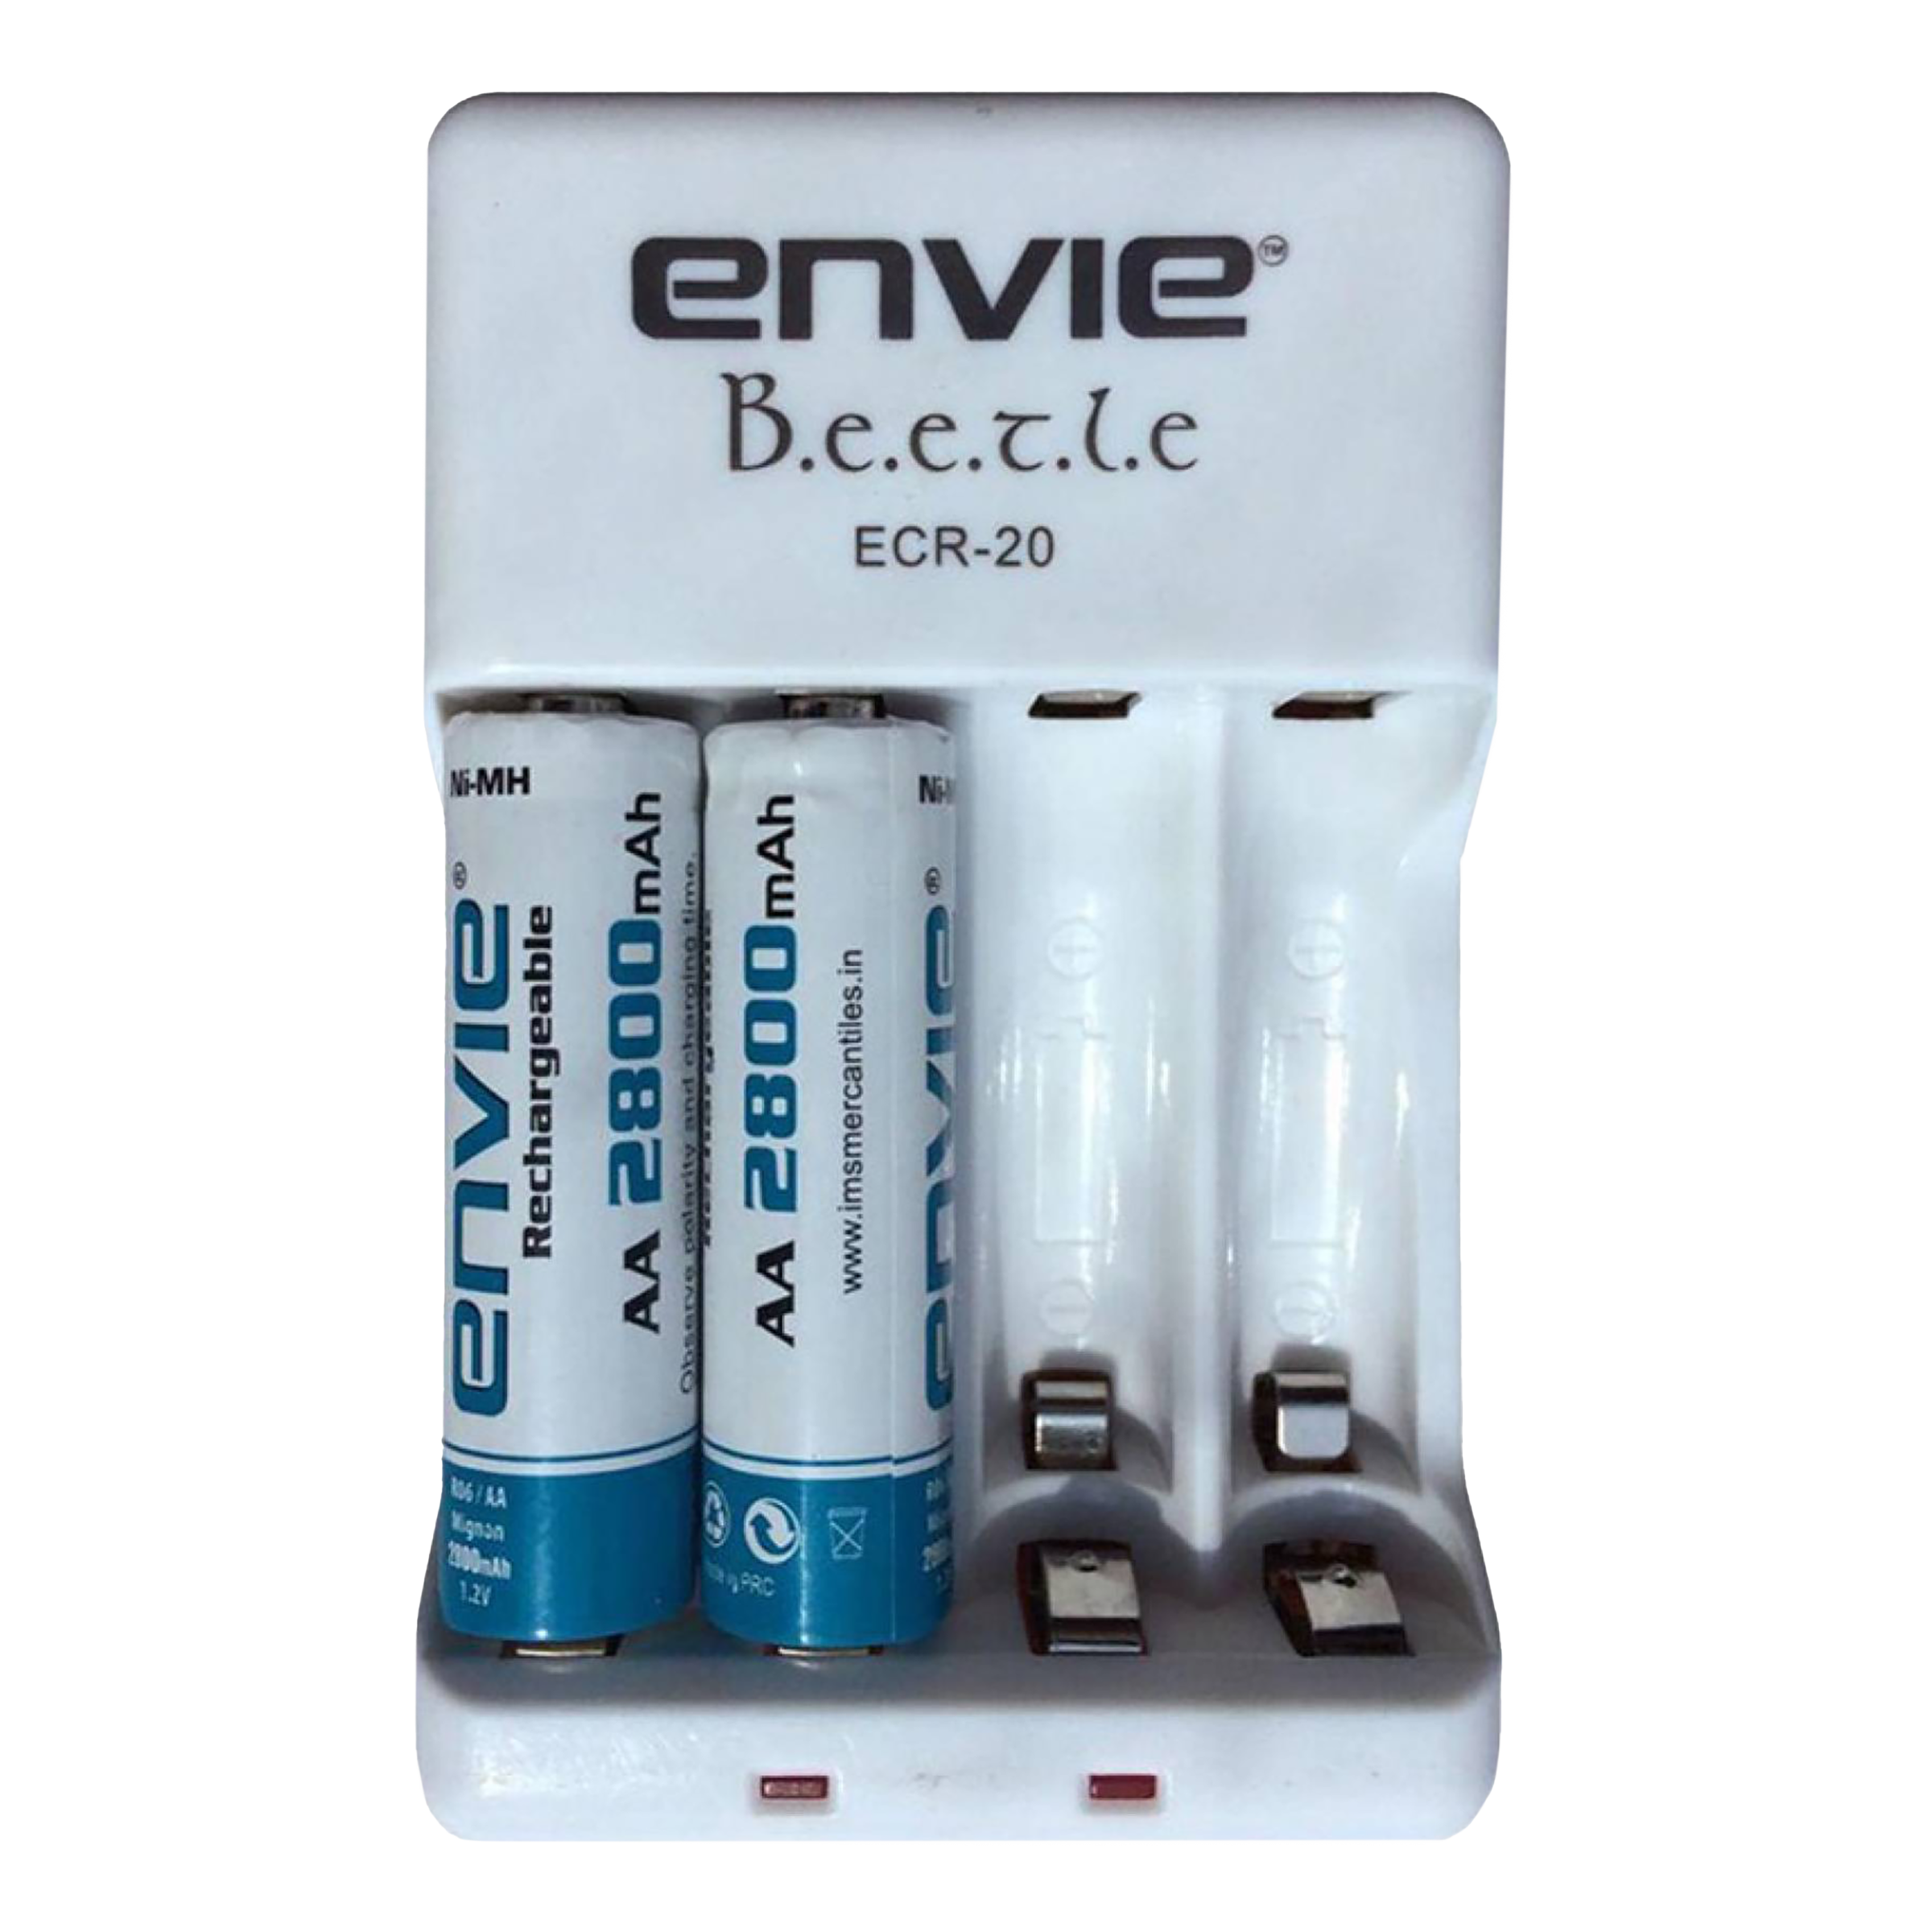 envie Beetle ECR-20 Camera Battery Charger Combo for 28002PL (4-Ports, Short Circuit Protection)